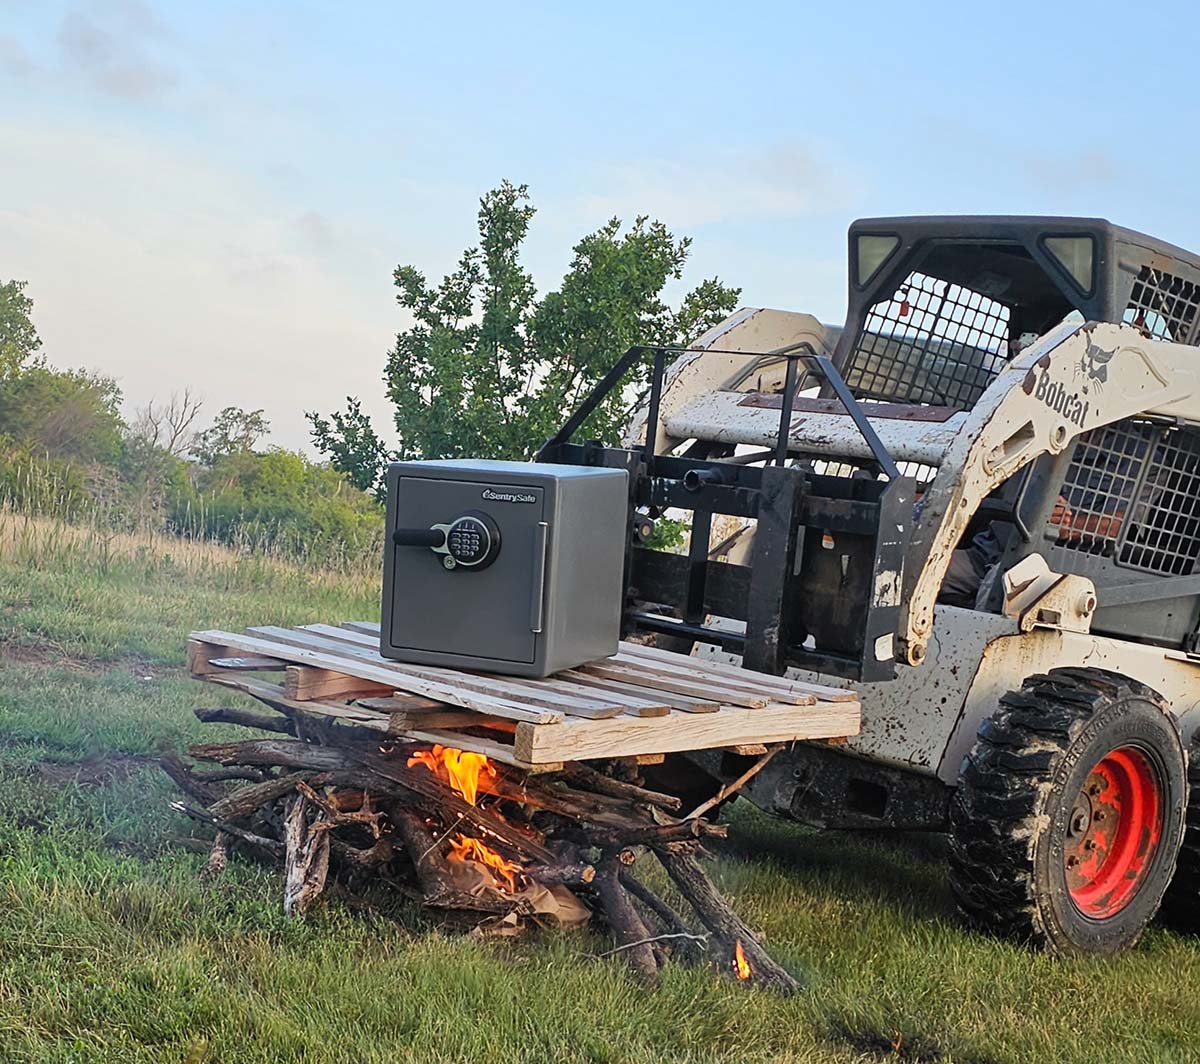 The SentrySafe home safe sitting on a pallet held over a bonfire by a skid steer